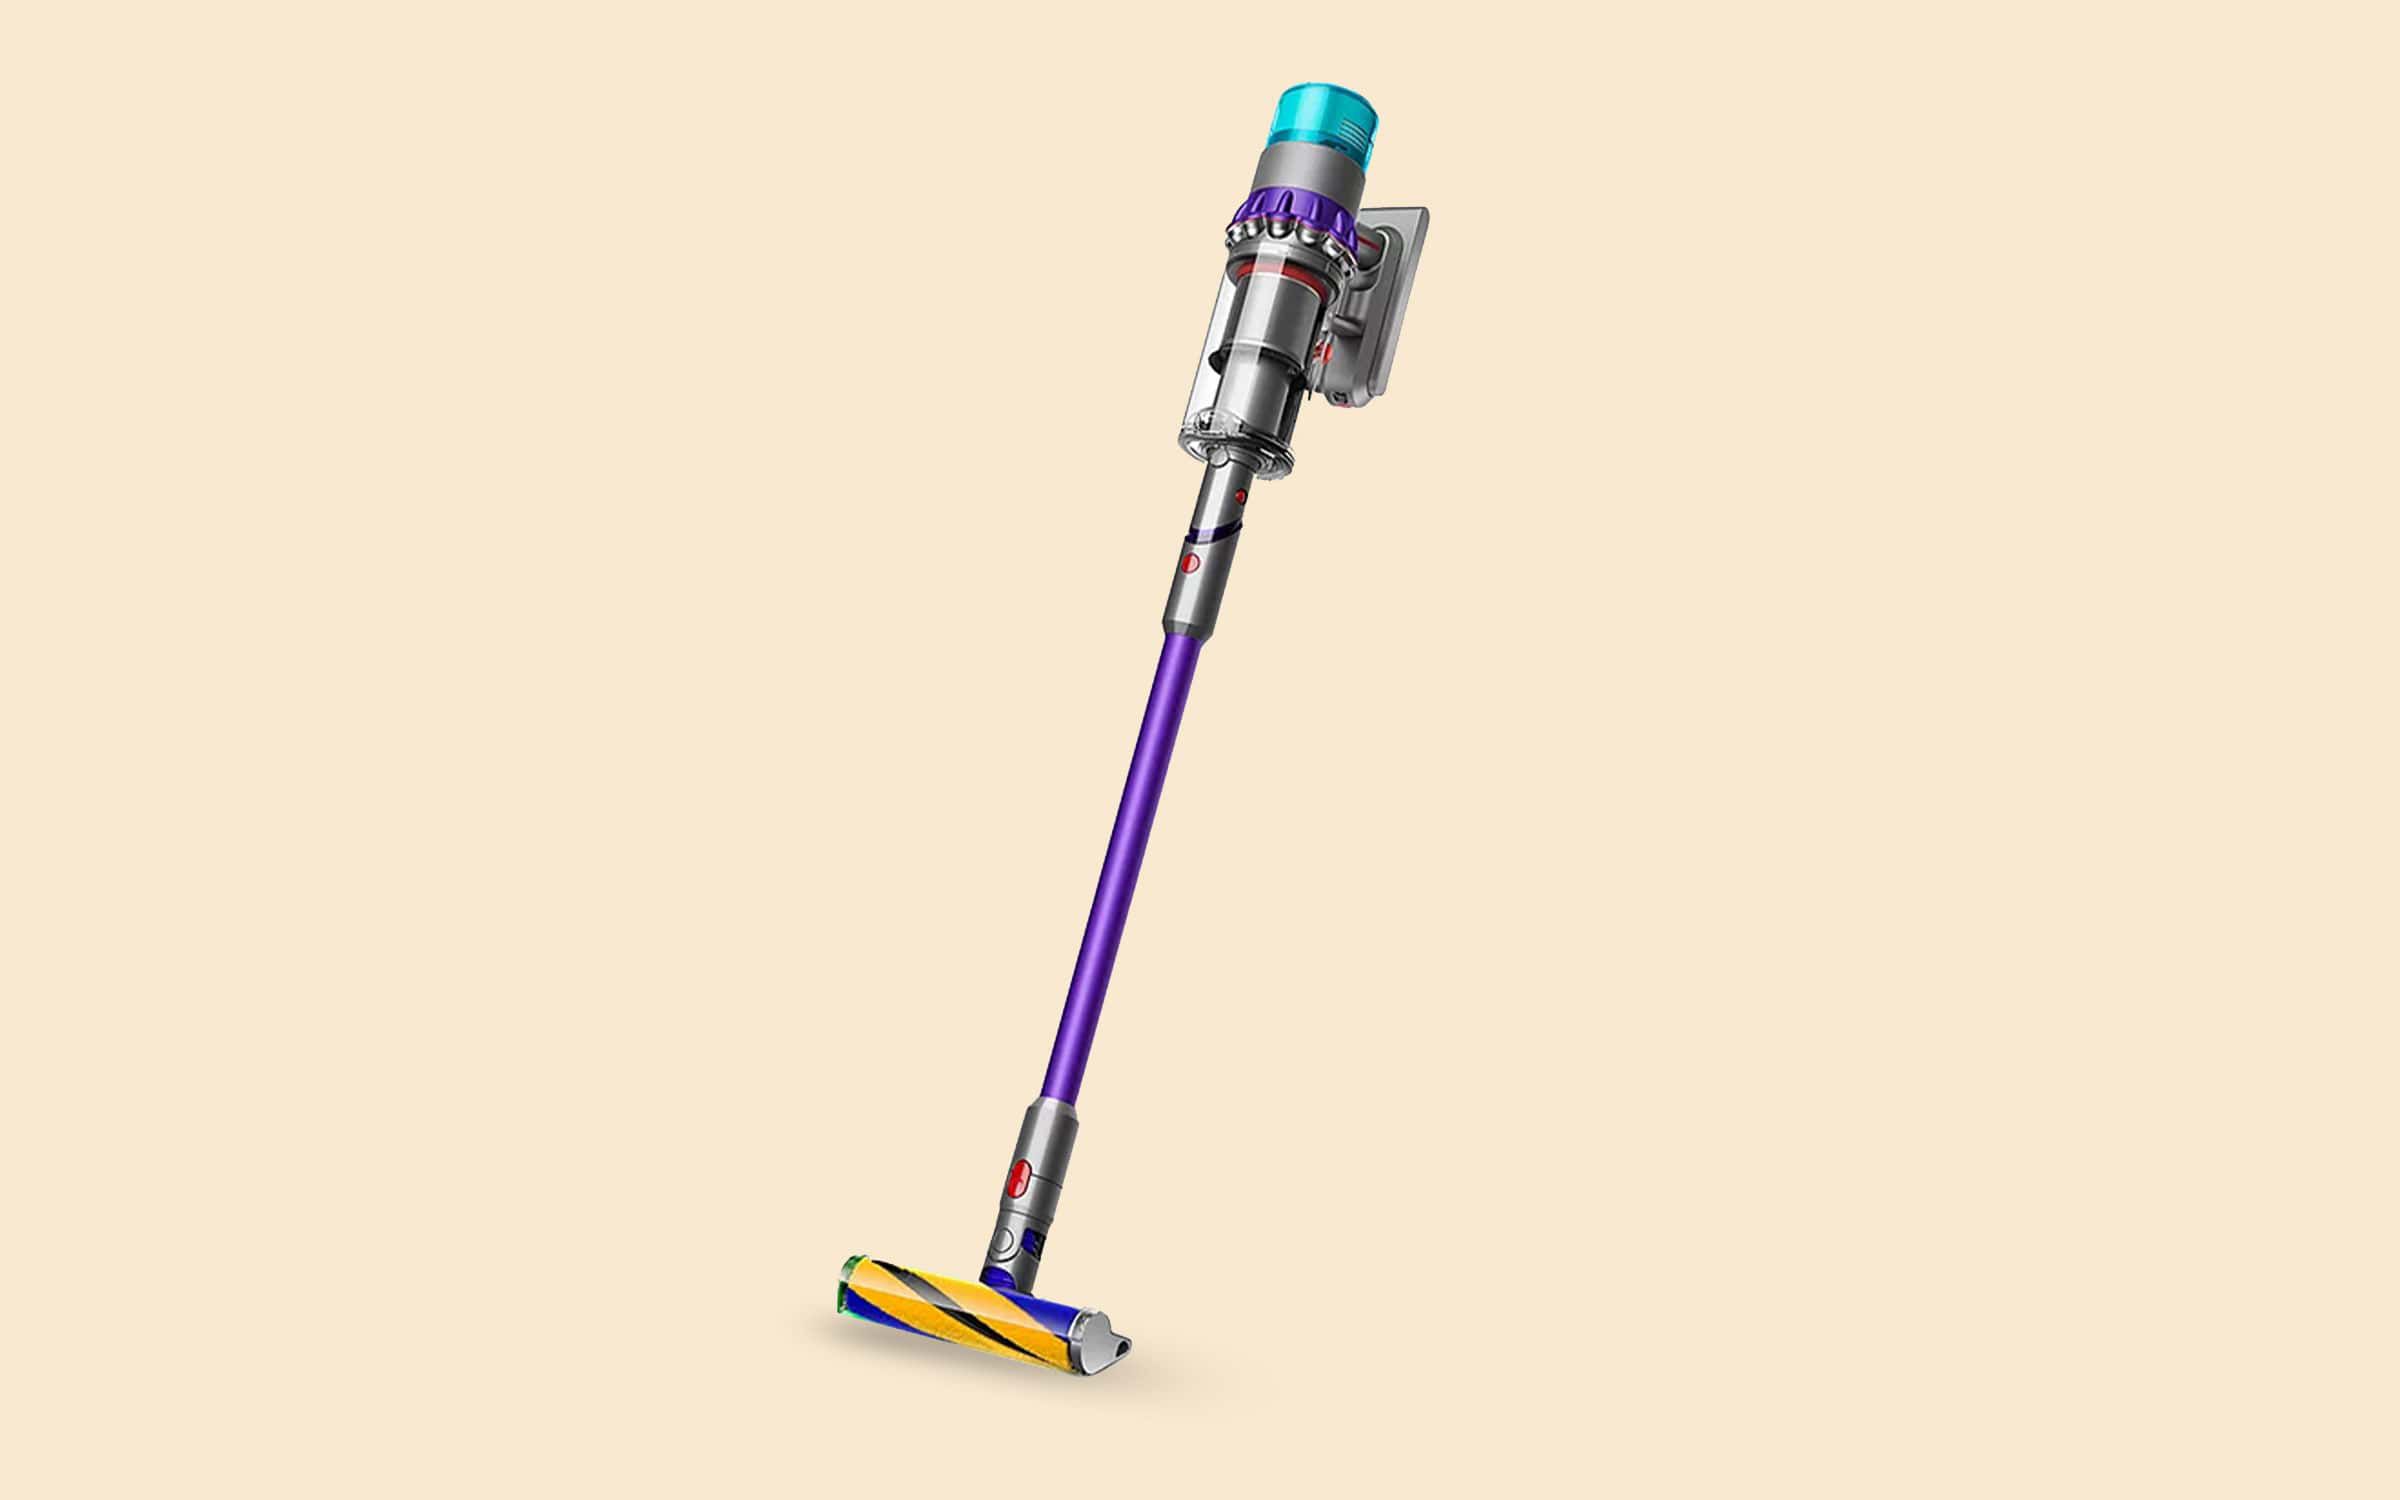 The Dyson Gen5 Detect Absolute Cordless vacuum cleaner